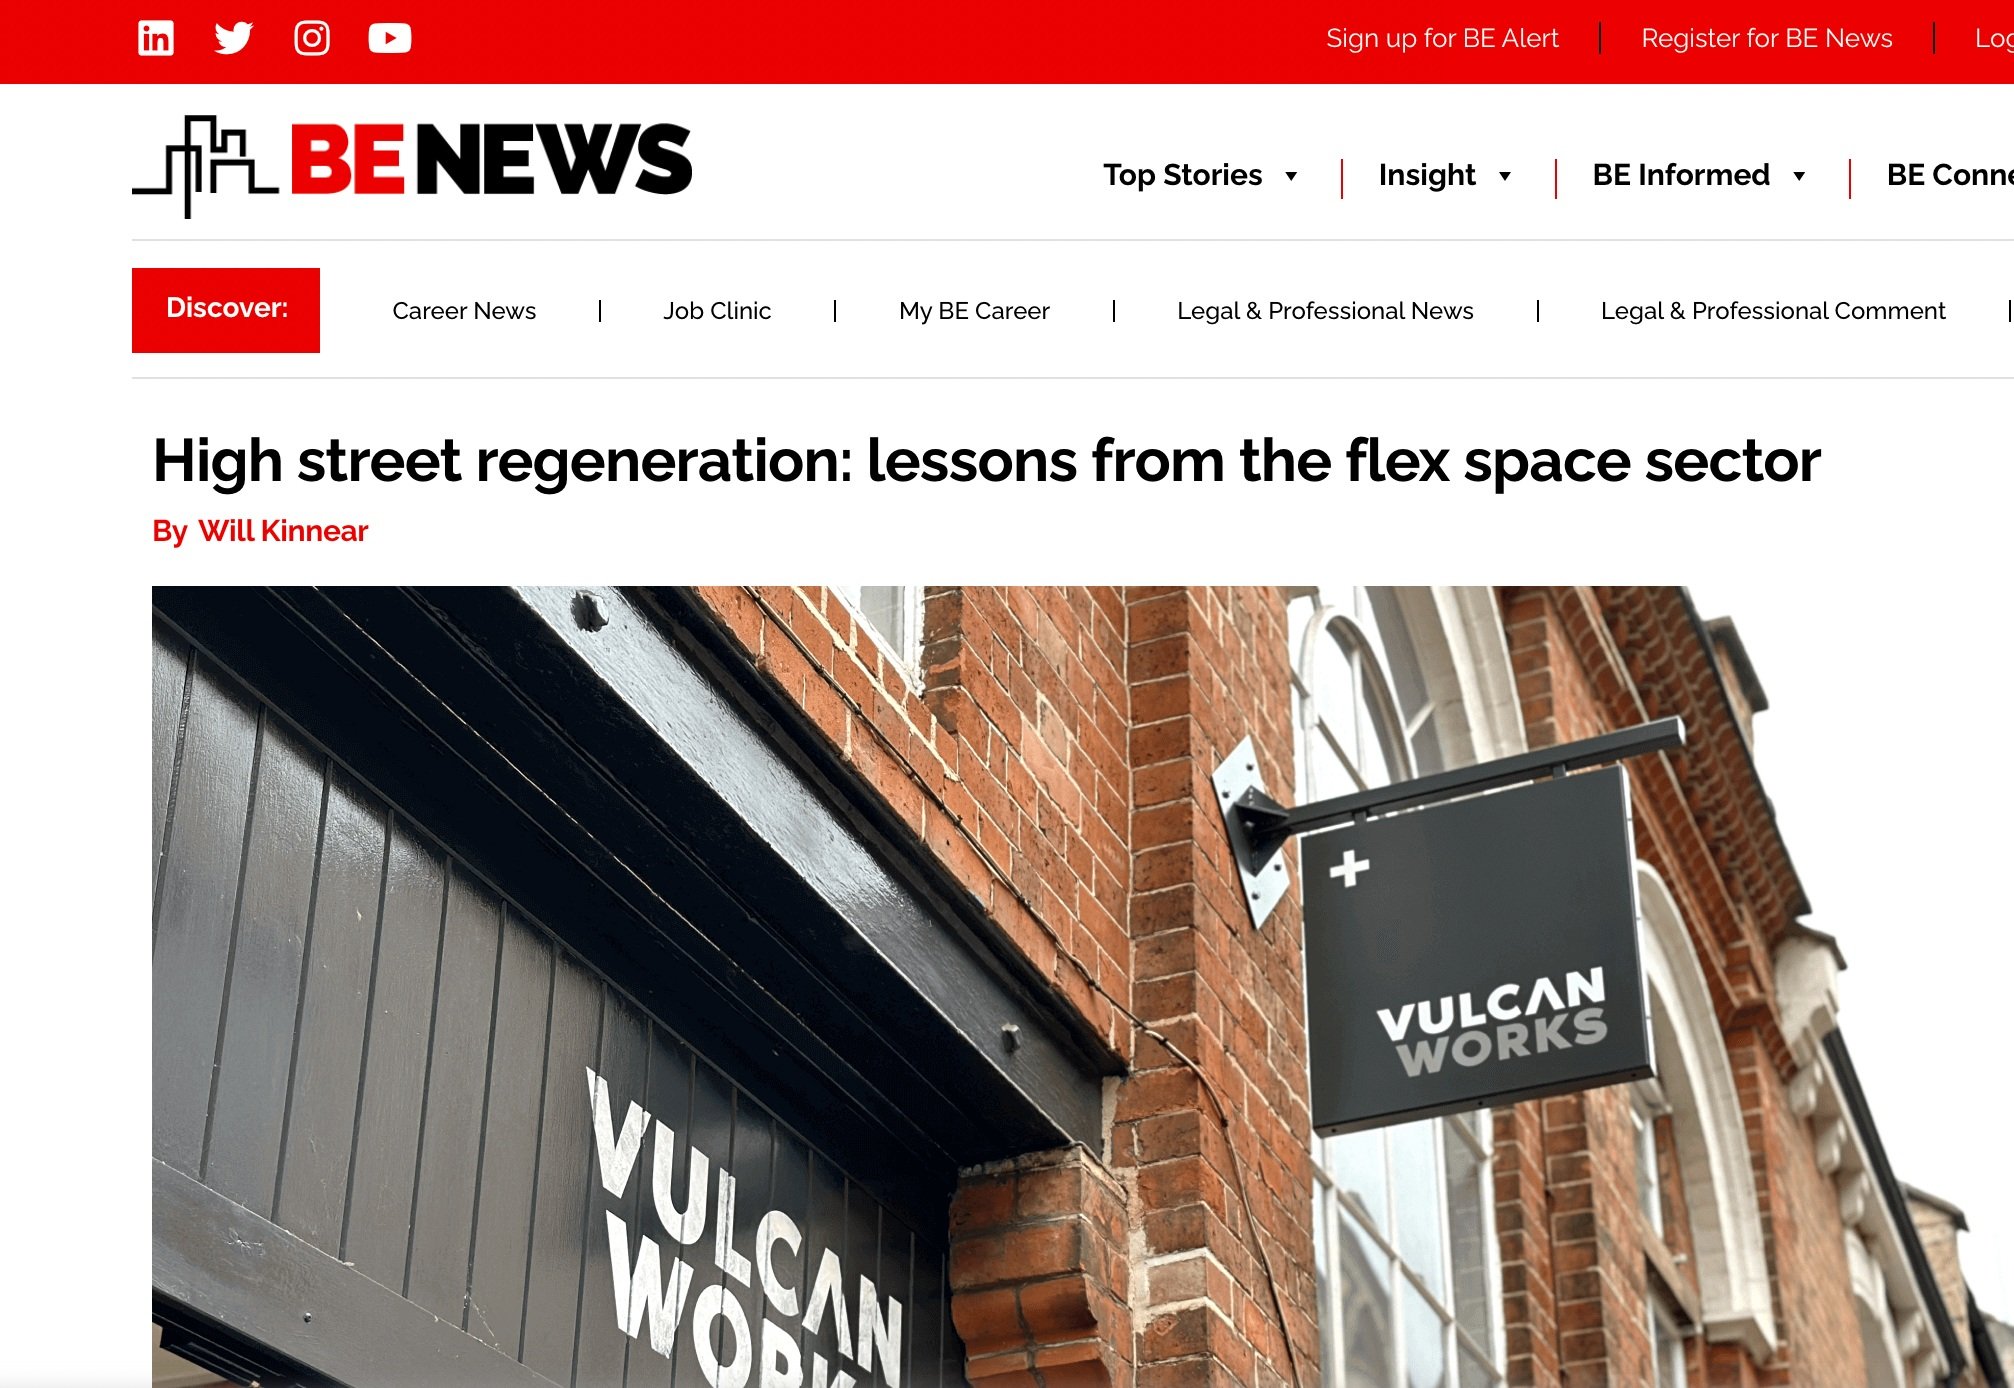 High street regeneration: lessons from the flex space sector